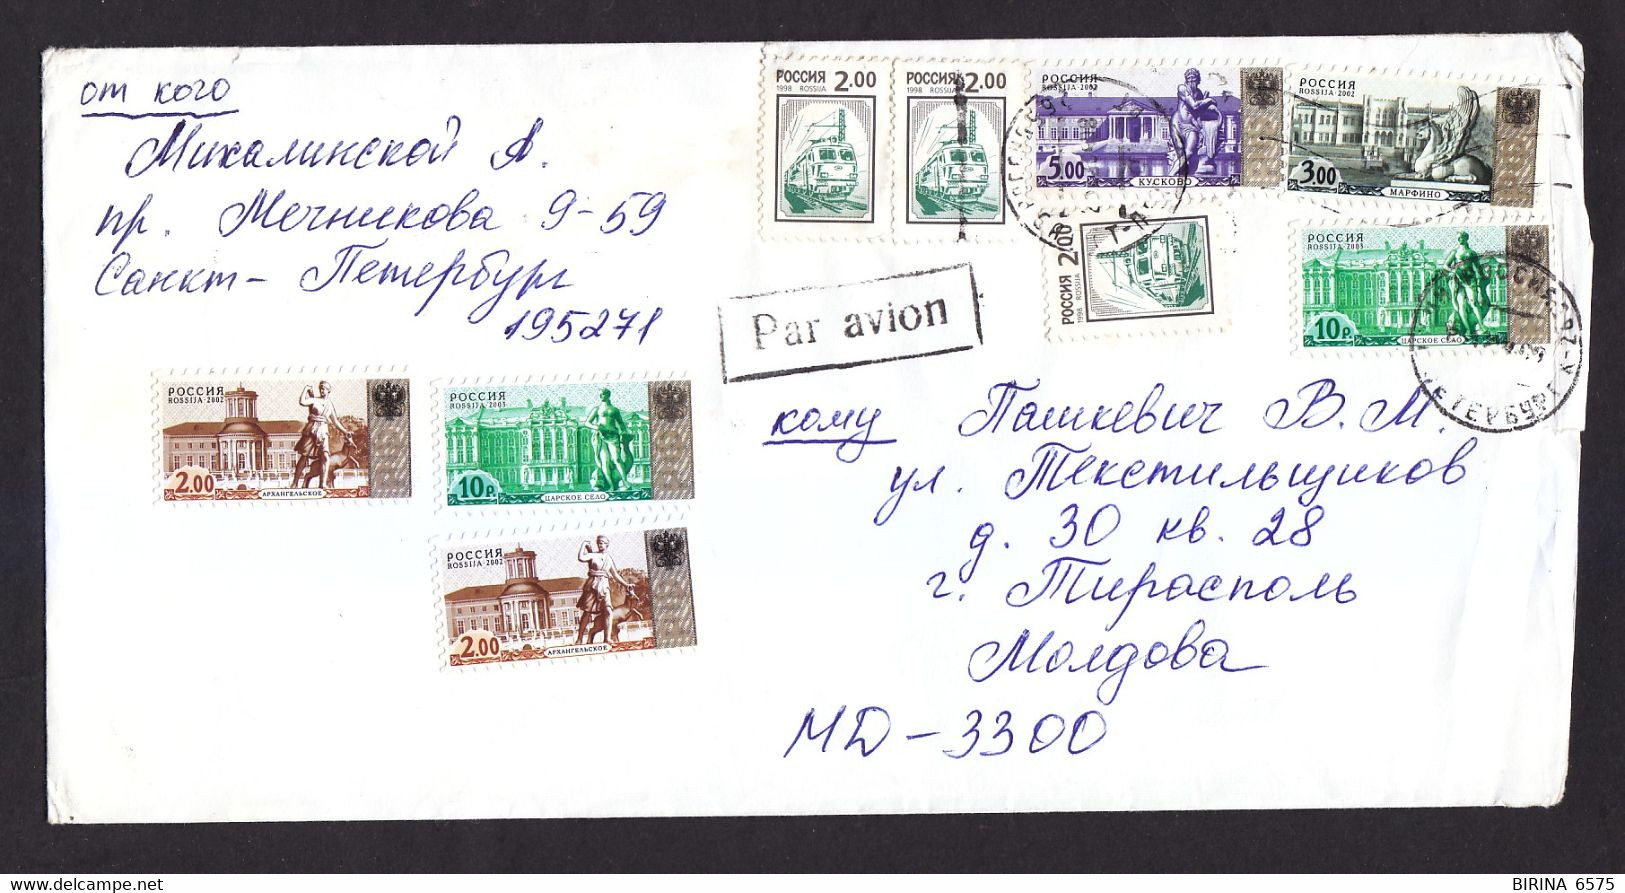 Envelope. RUSSIA. 2005. - 2-48 - Covers & Documents